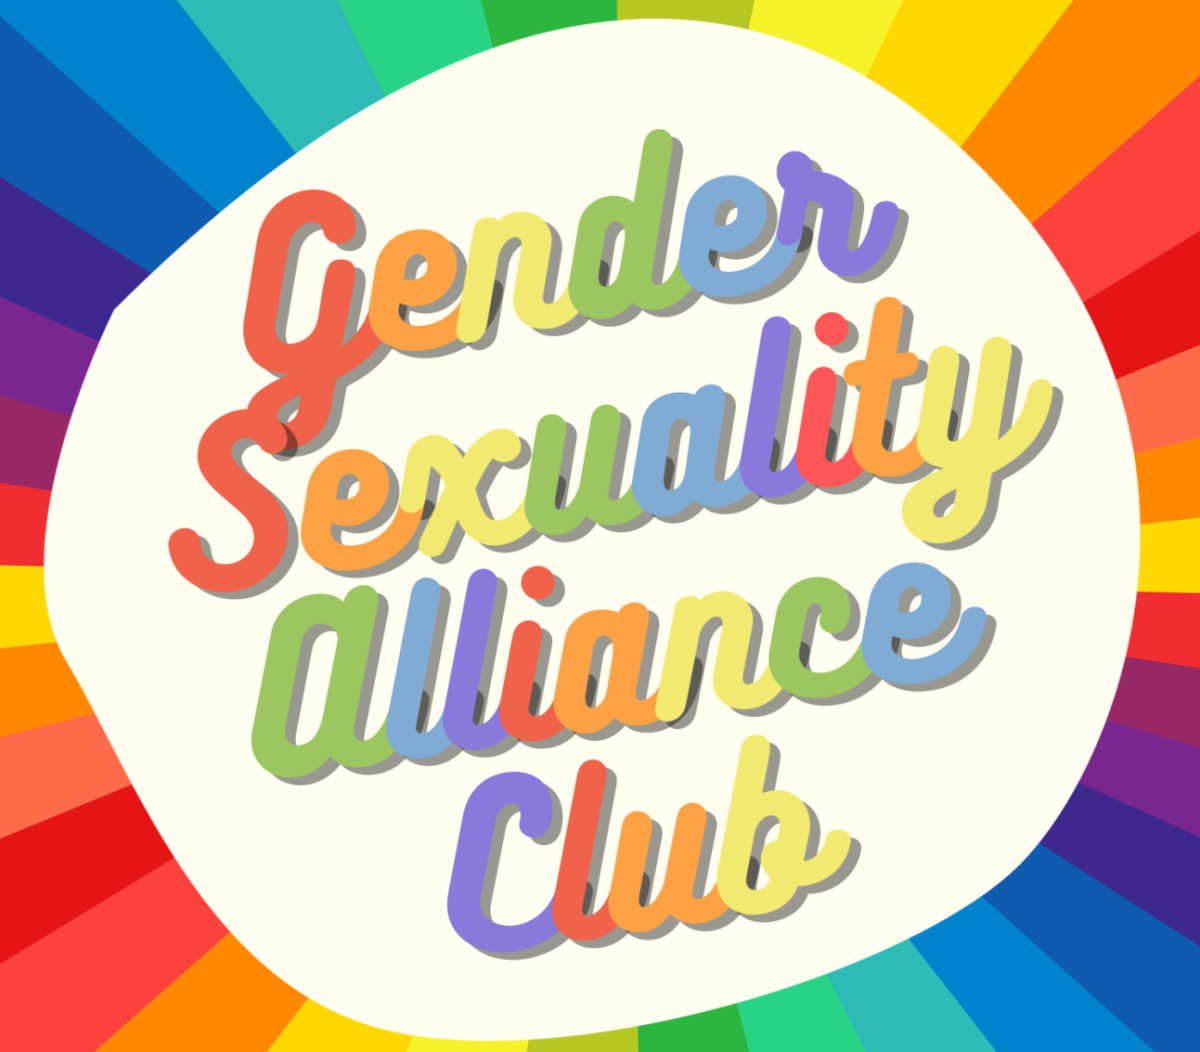 Gender+Sexuality+Alliance+Club%21